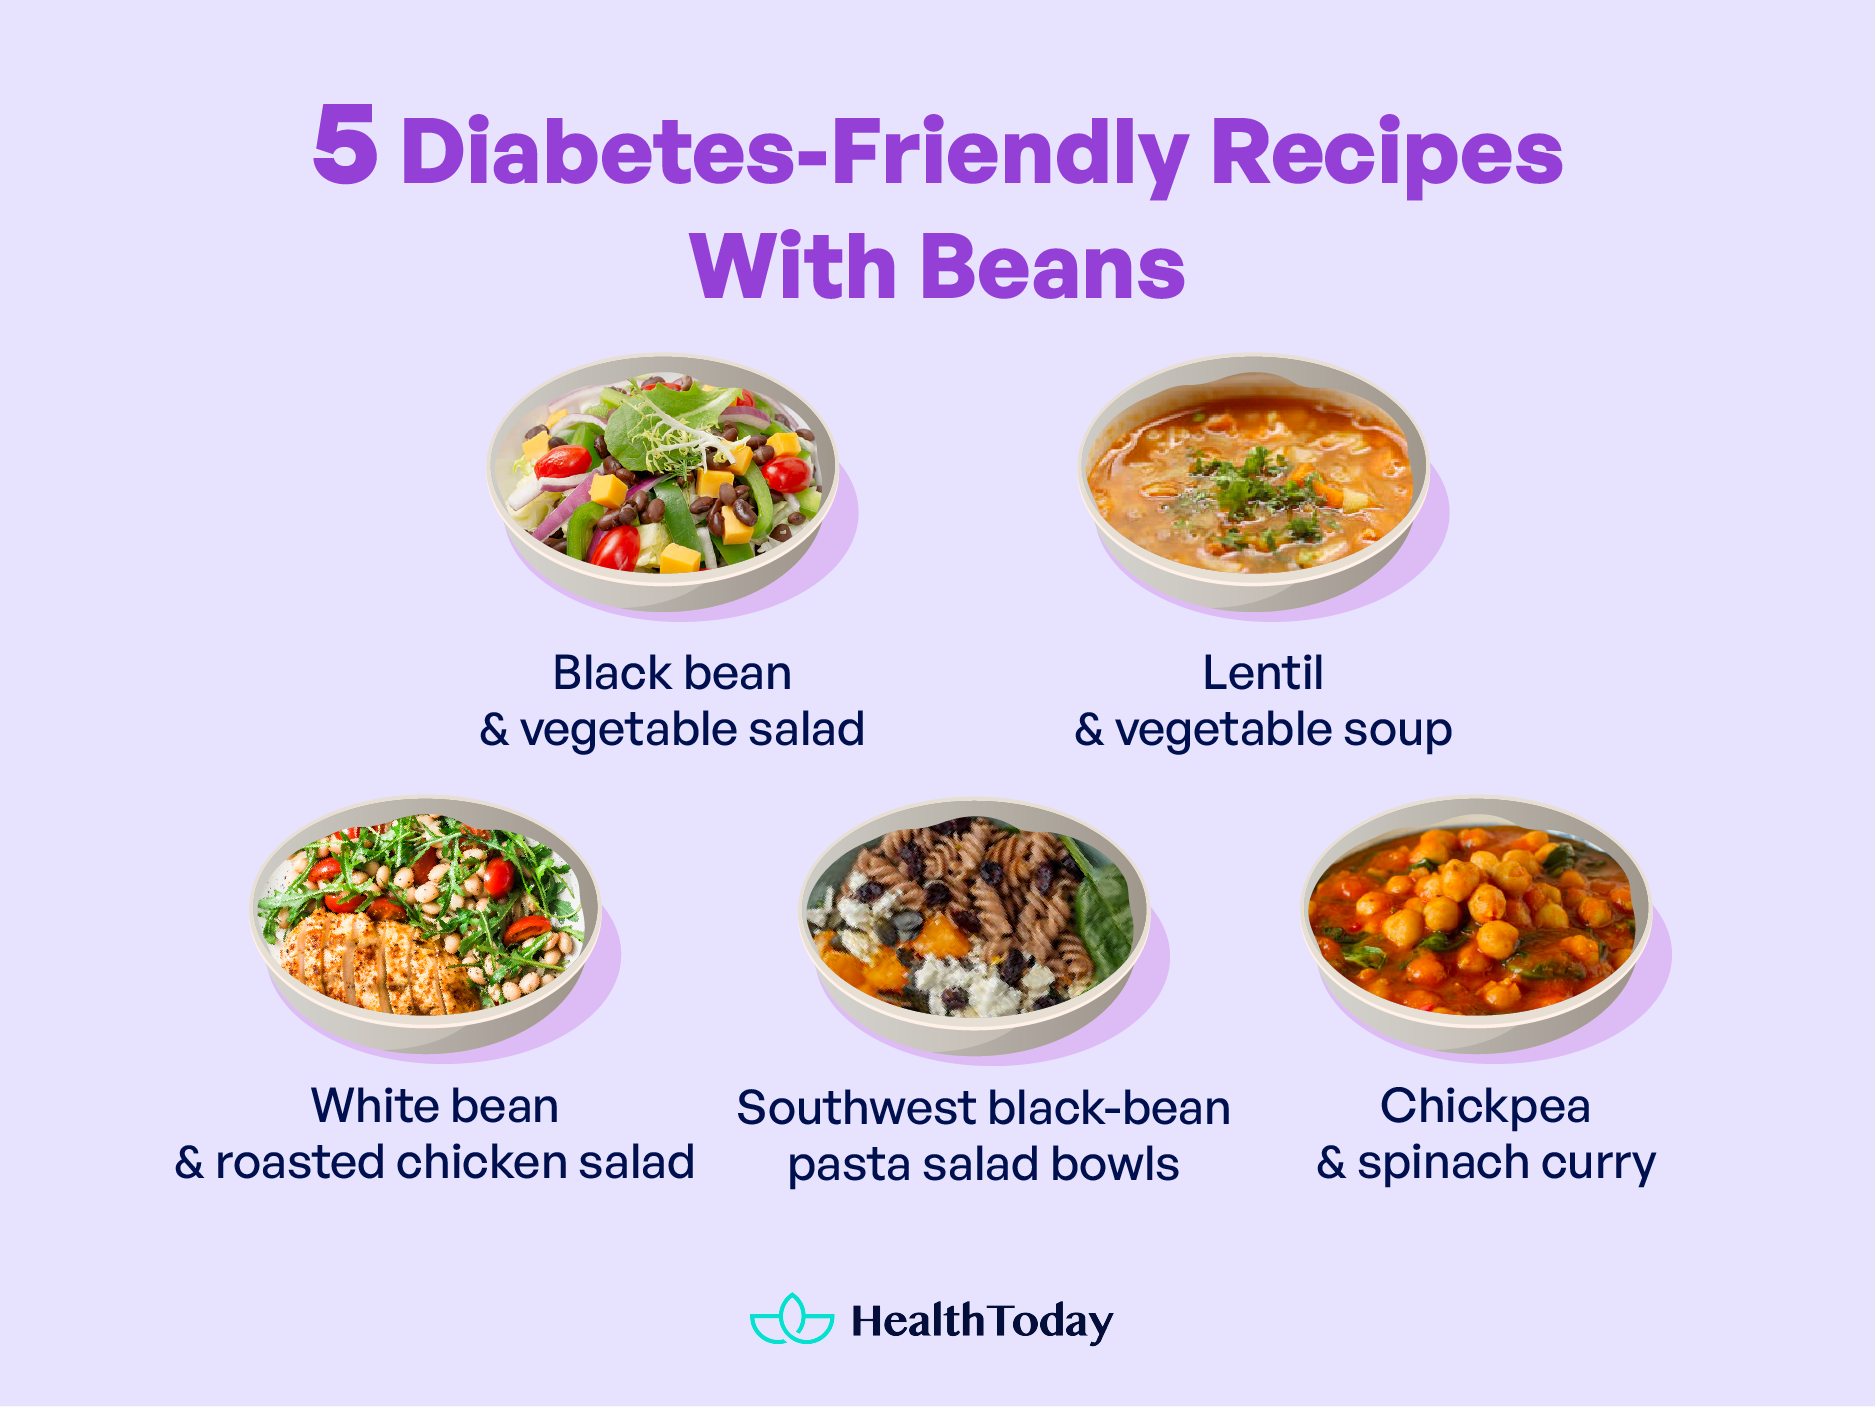 Are Beans Good for Diabetics Diabetes and Beans 04